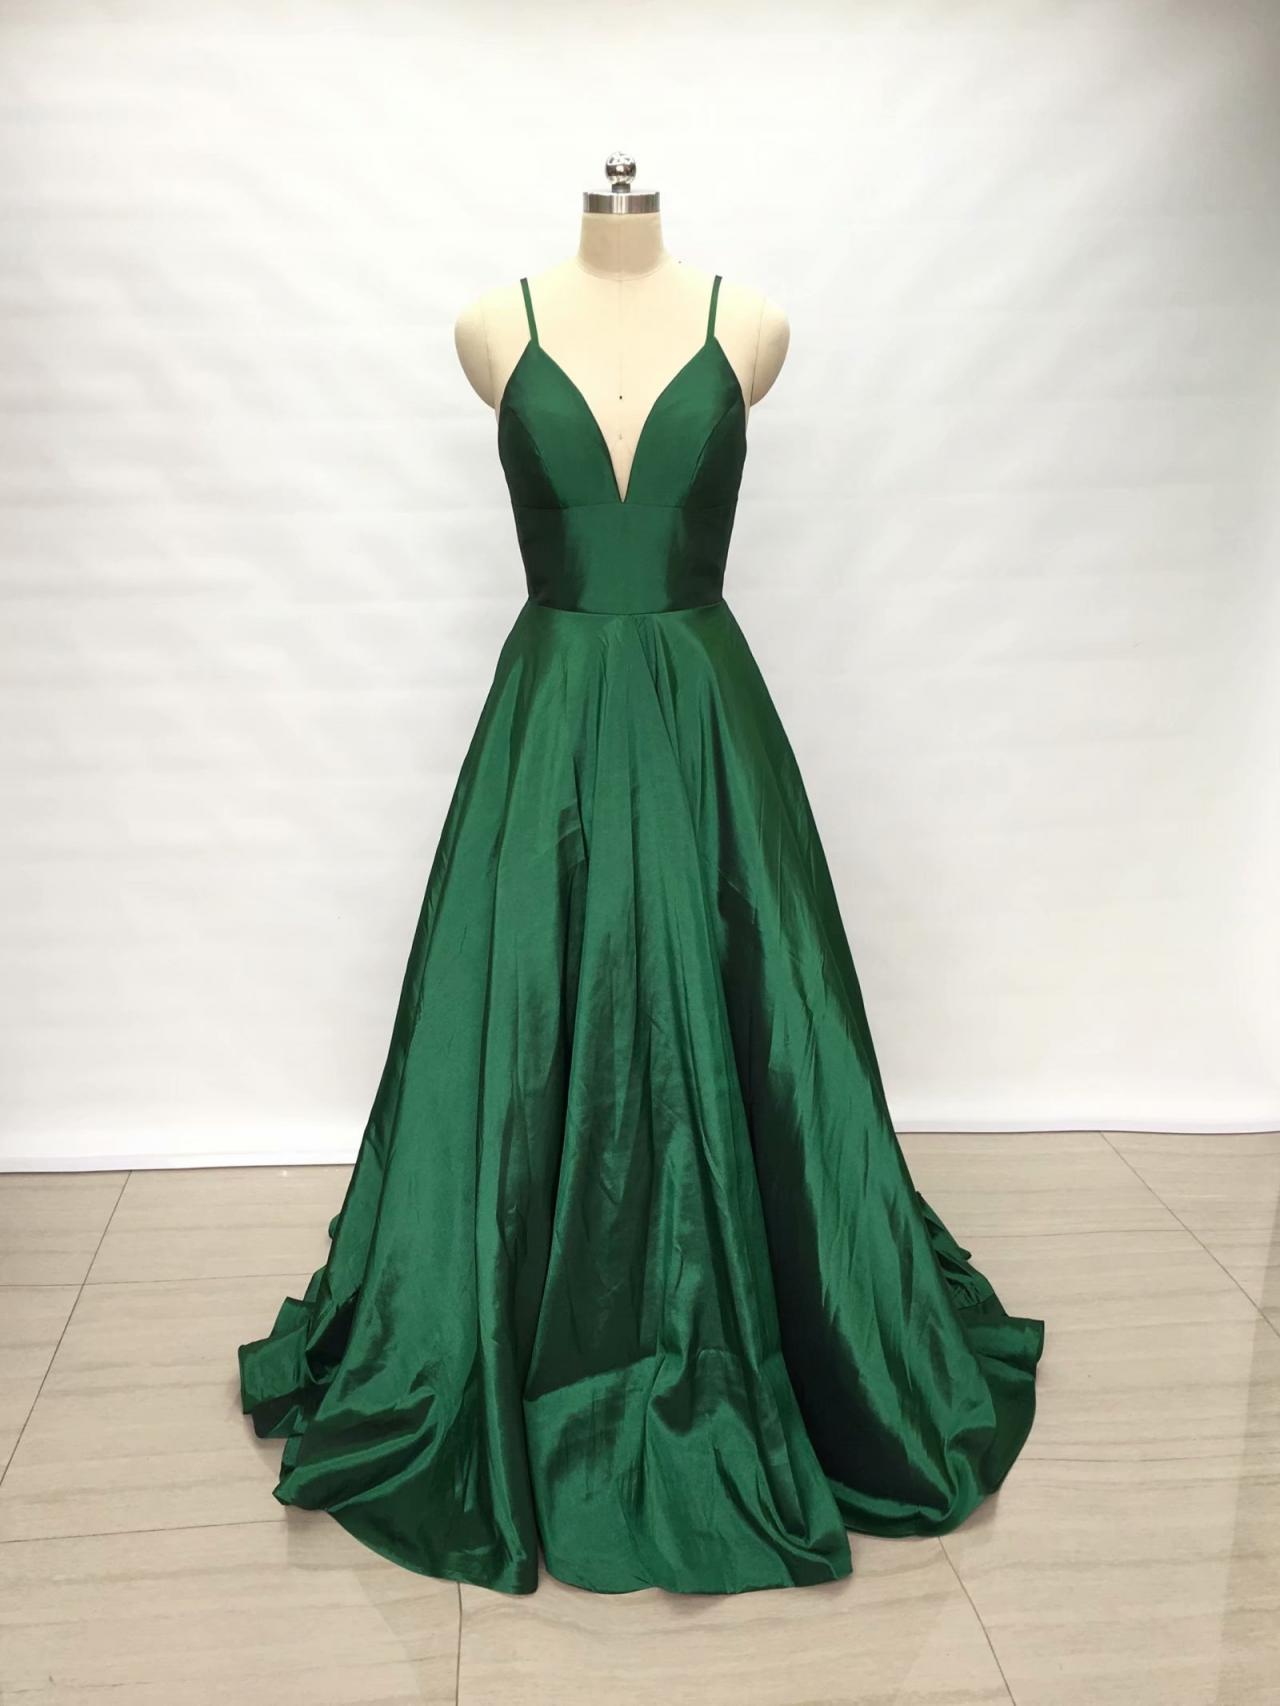 2019 Wedding Party Gowns Spaghetti Straps Dark Green Evening Dresses A Line Prom Gowns